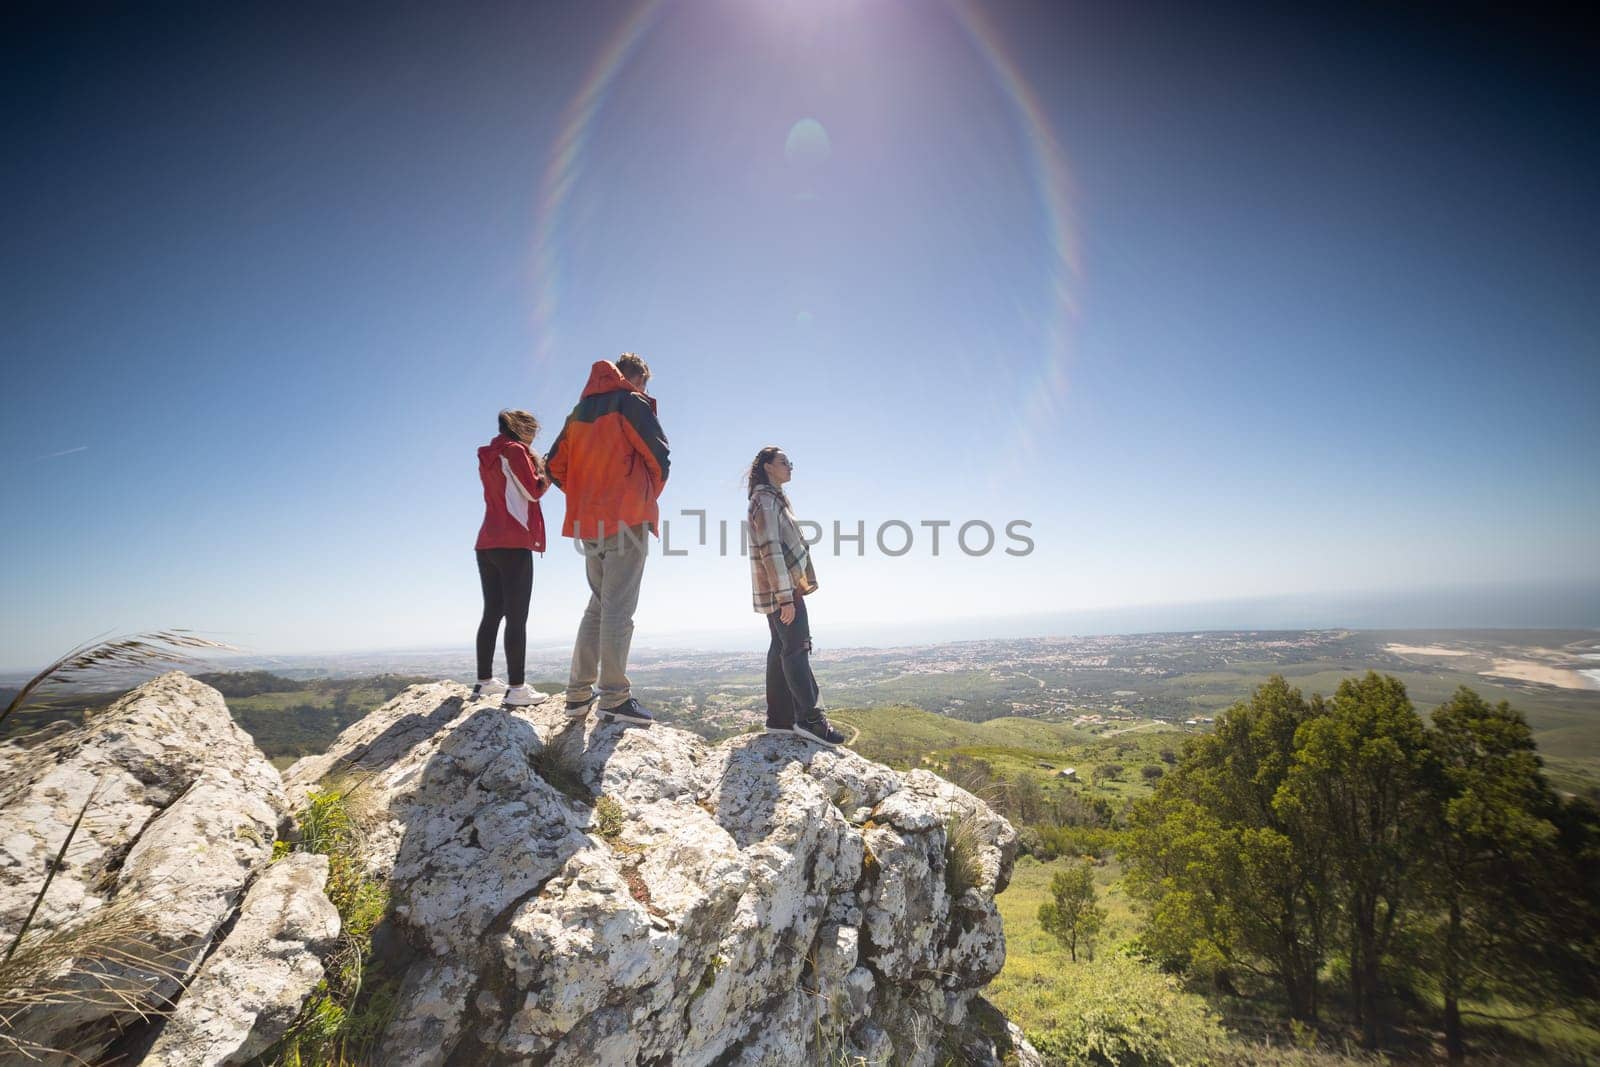 A group of friends is standing on a large rock formation, looking out at the landscape. They are enjoying the view and taking photos of the scenery.